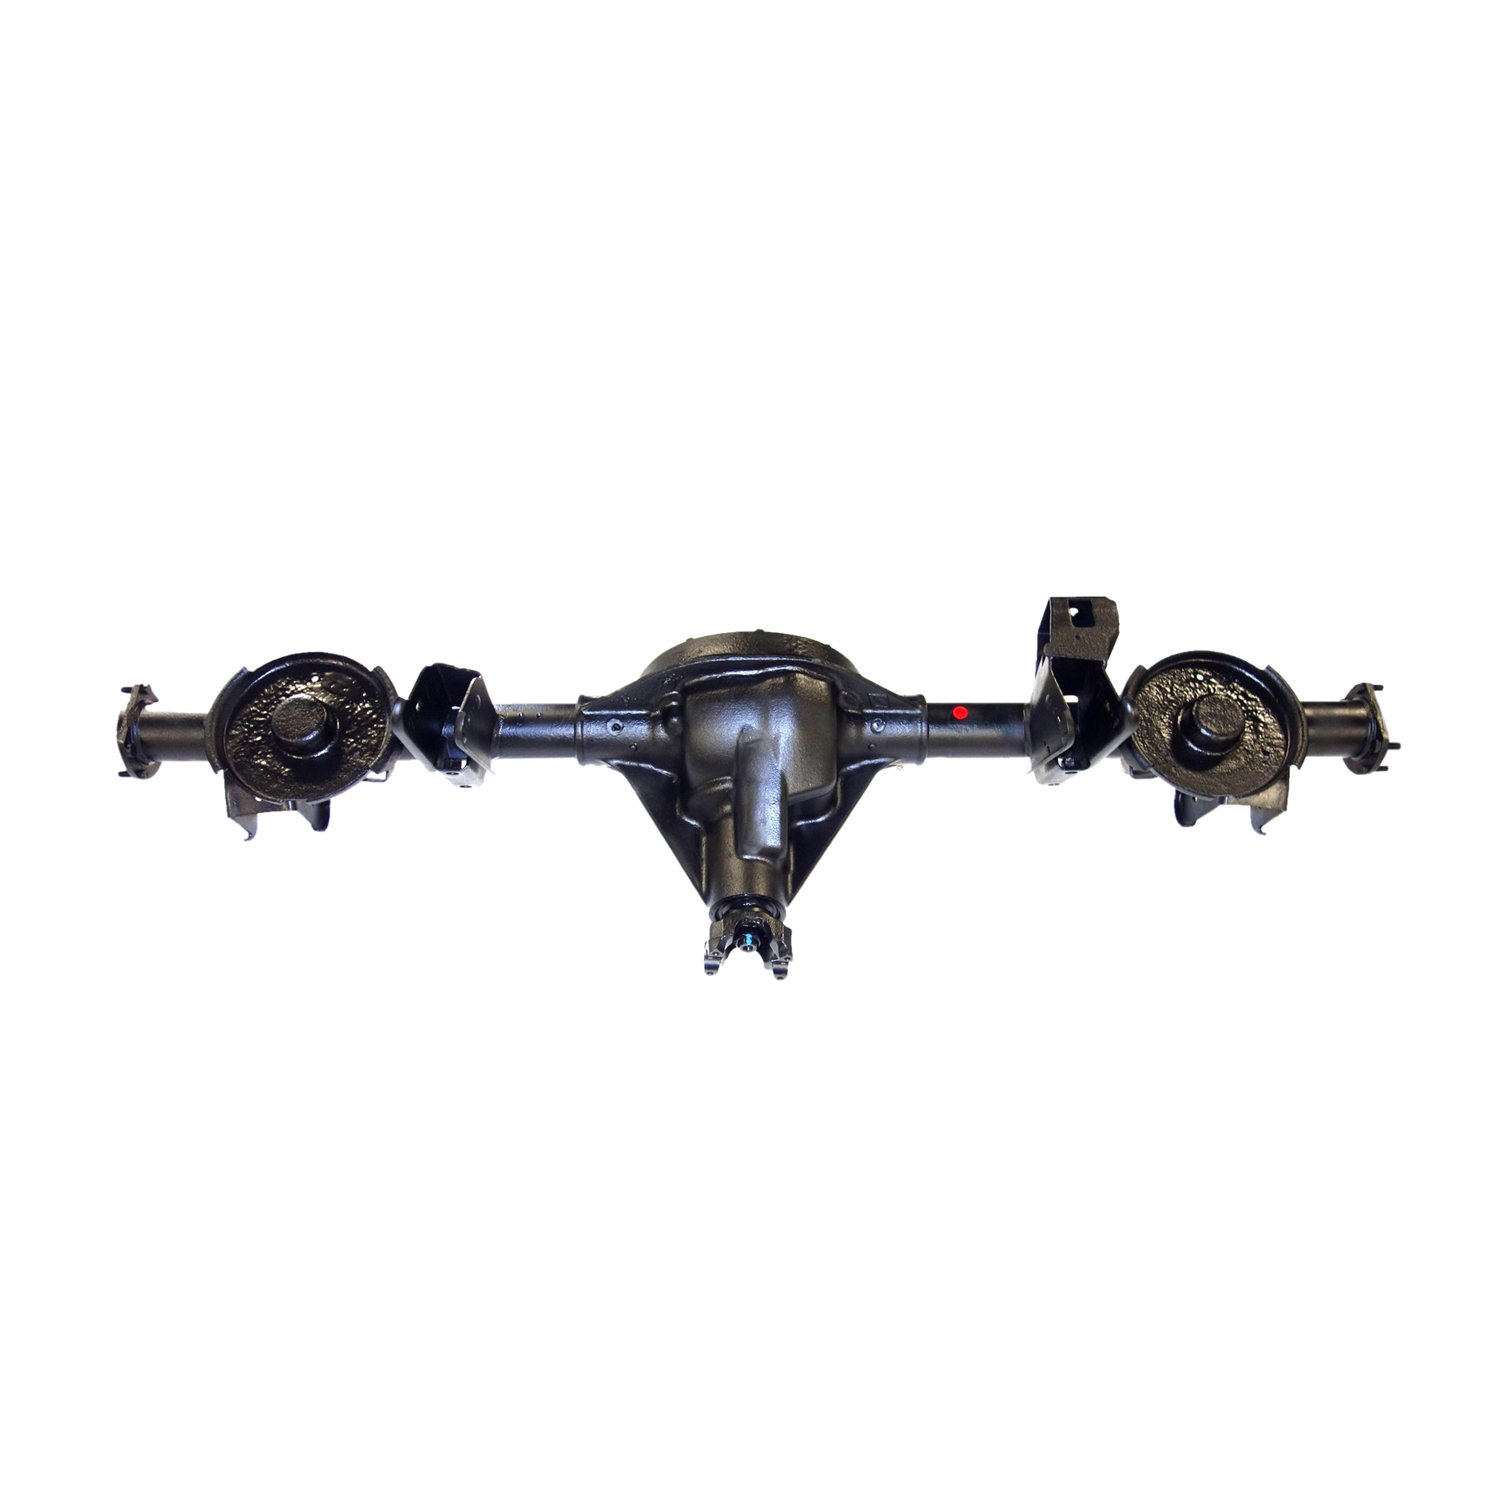 Remanufactured Complete Axle Assembly for Dana 35 97-02 Wrangler 3.73 with ABS, Posi LSD